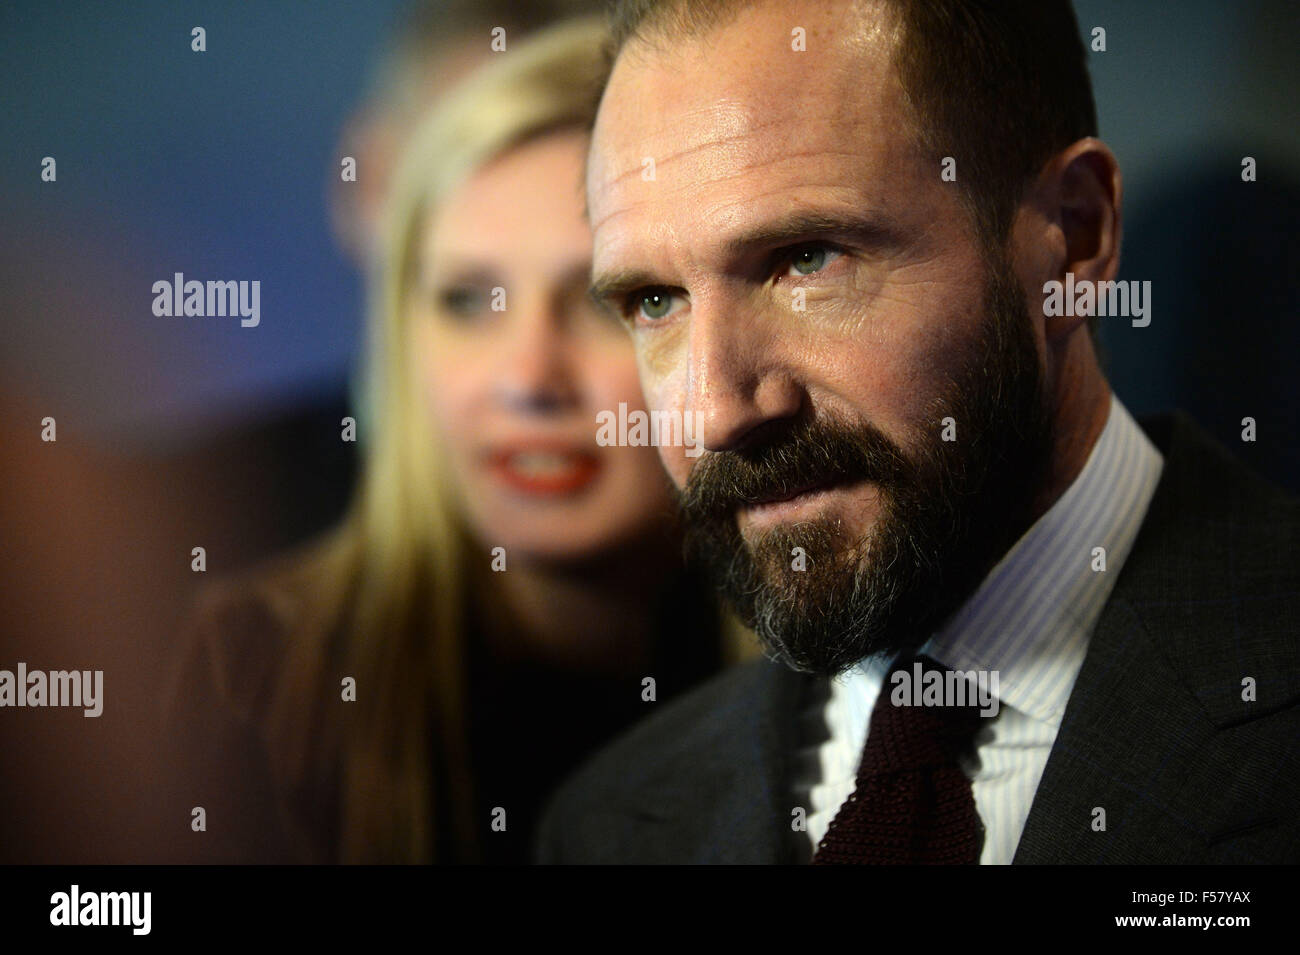 Moscow, Russia. 29th Oct, 2015. British actor Ralph Fiennes arrives at the new James Bond movie 'Spectre' premiere in Moscow, Russia, Oct. 29, 2015. © Pavel Bednyakov/Xinhua/Alamy Live News Stock Photo